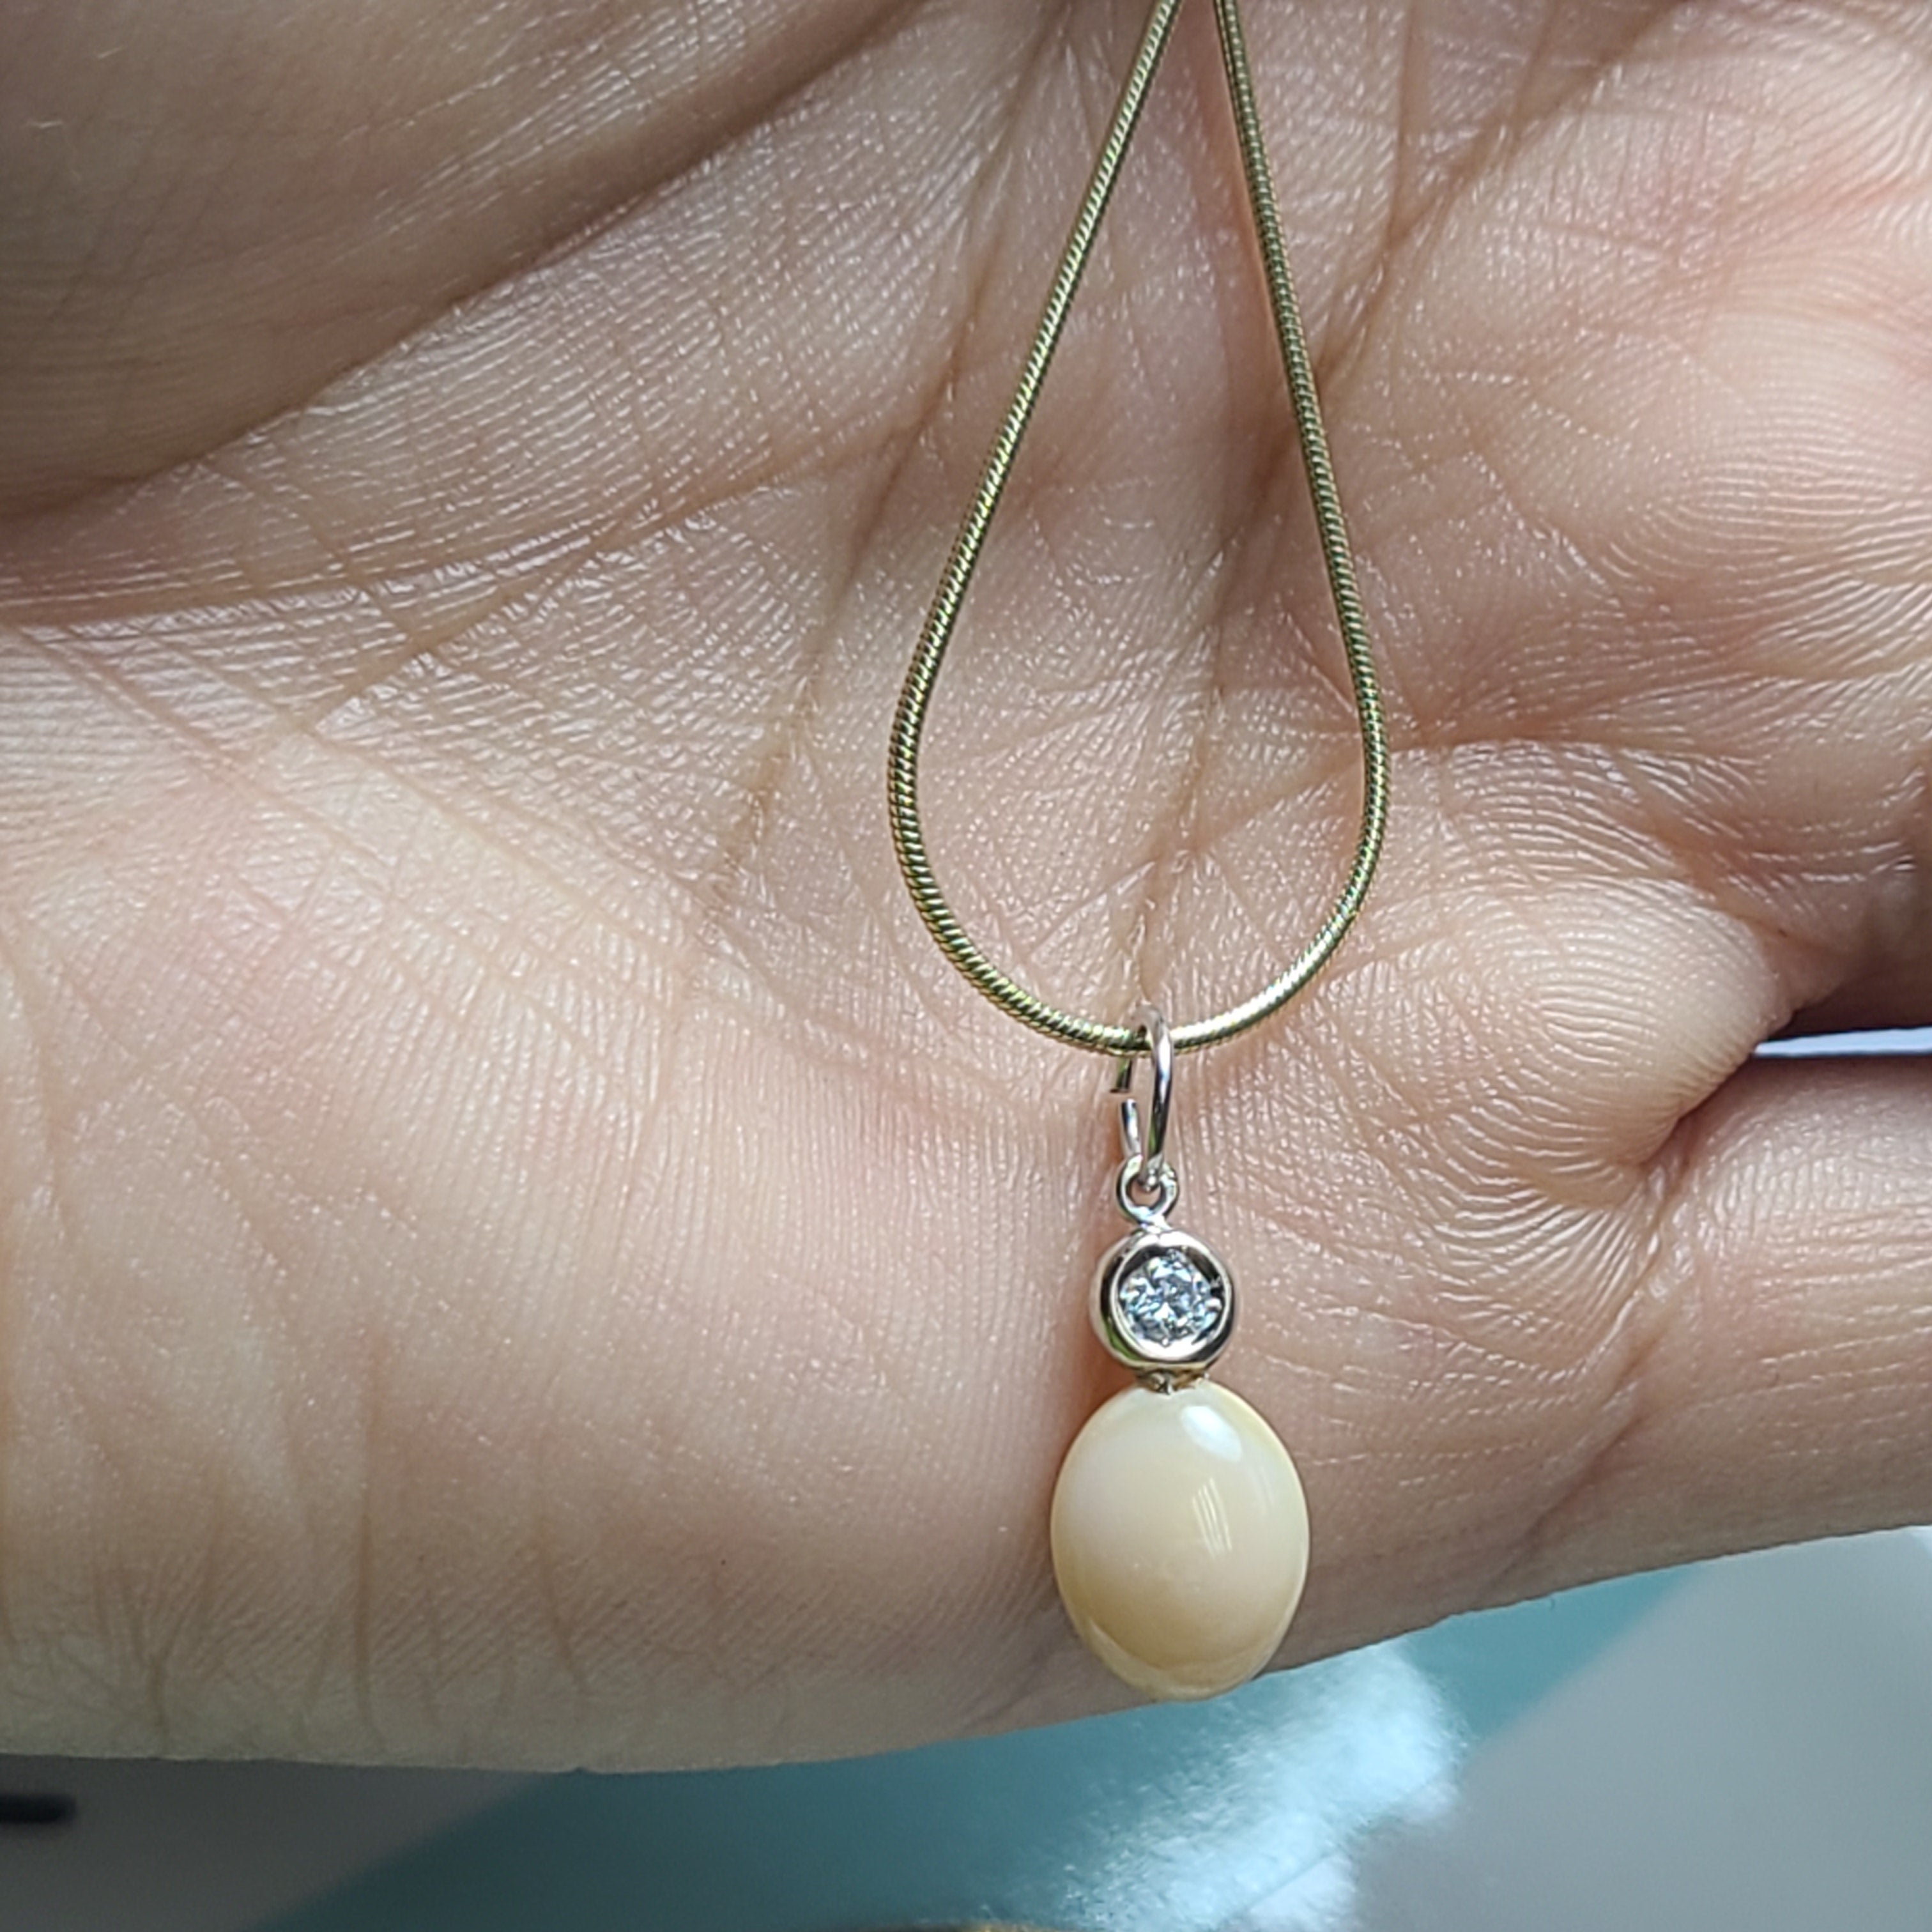 14K White Gold Creamy Light Brown Natural Conch Pearl with Old Mine Cut Diamond Pendant Charm